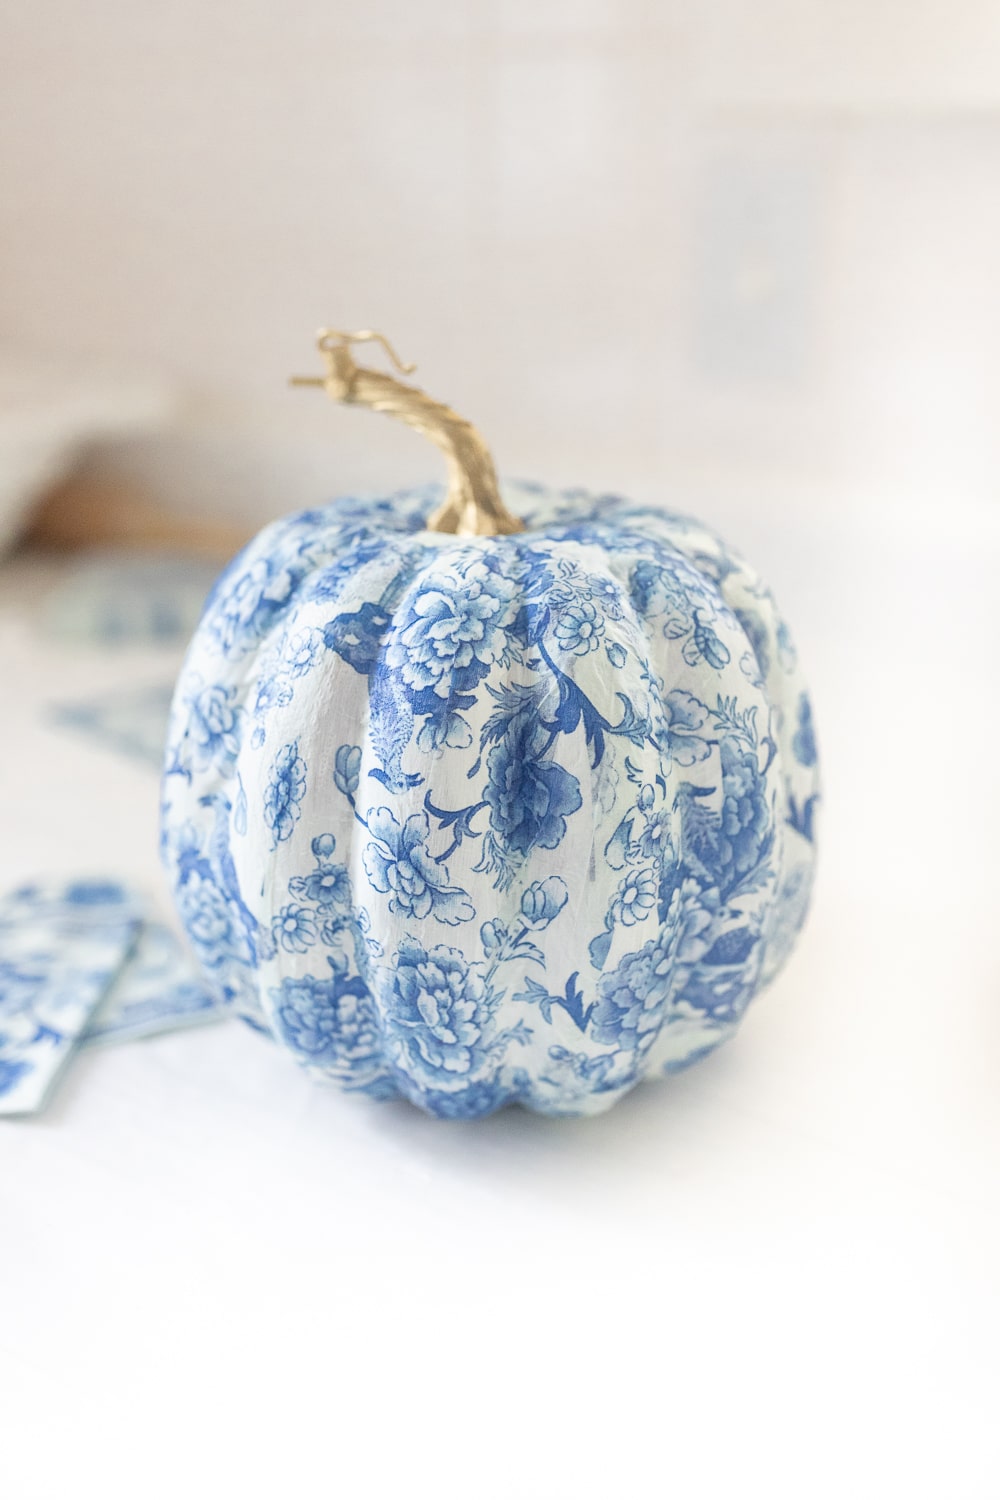 Blue and white decorative pumpkins created by blogger Stephanie Ziajka on Diary of a Debutante